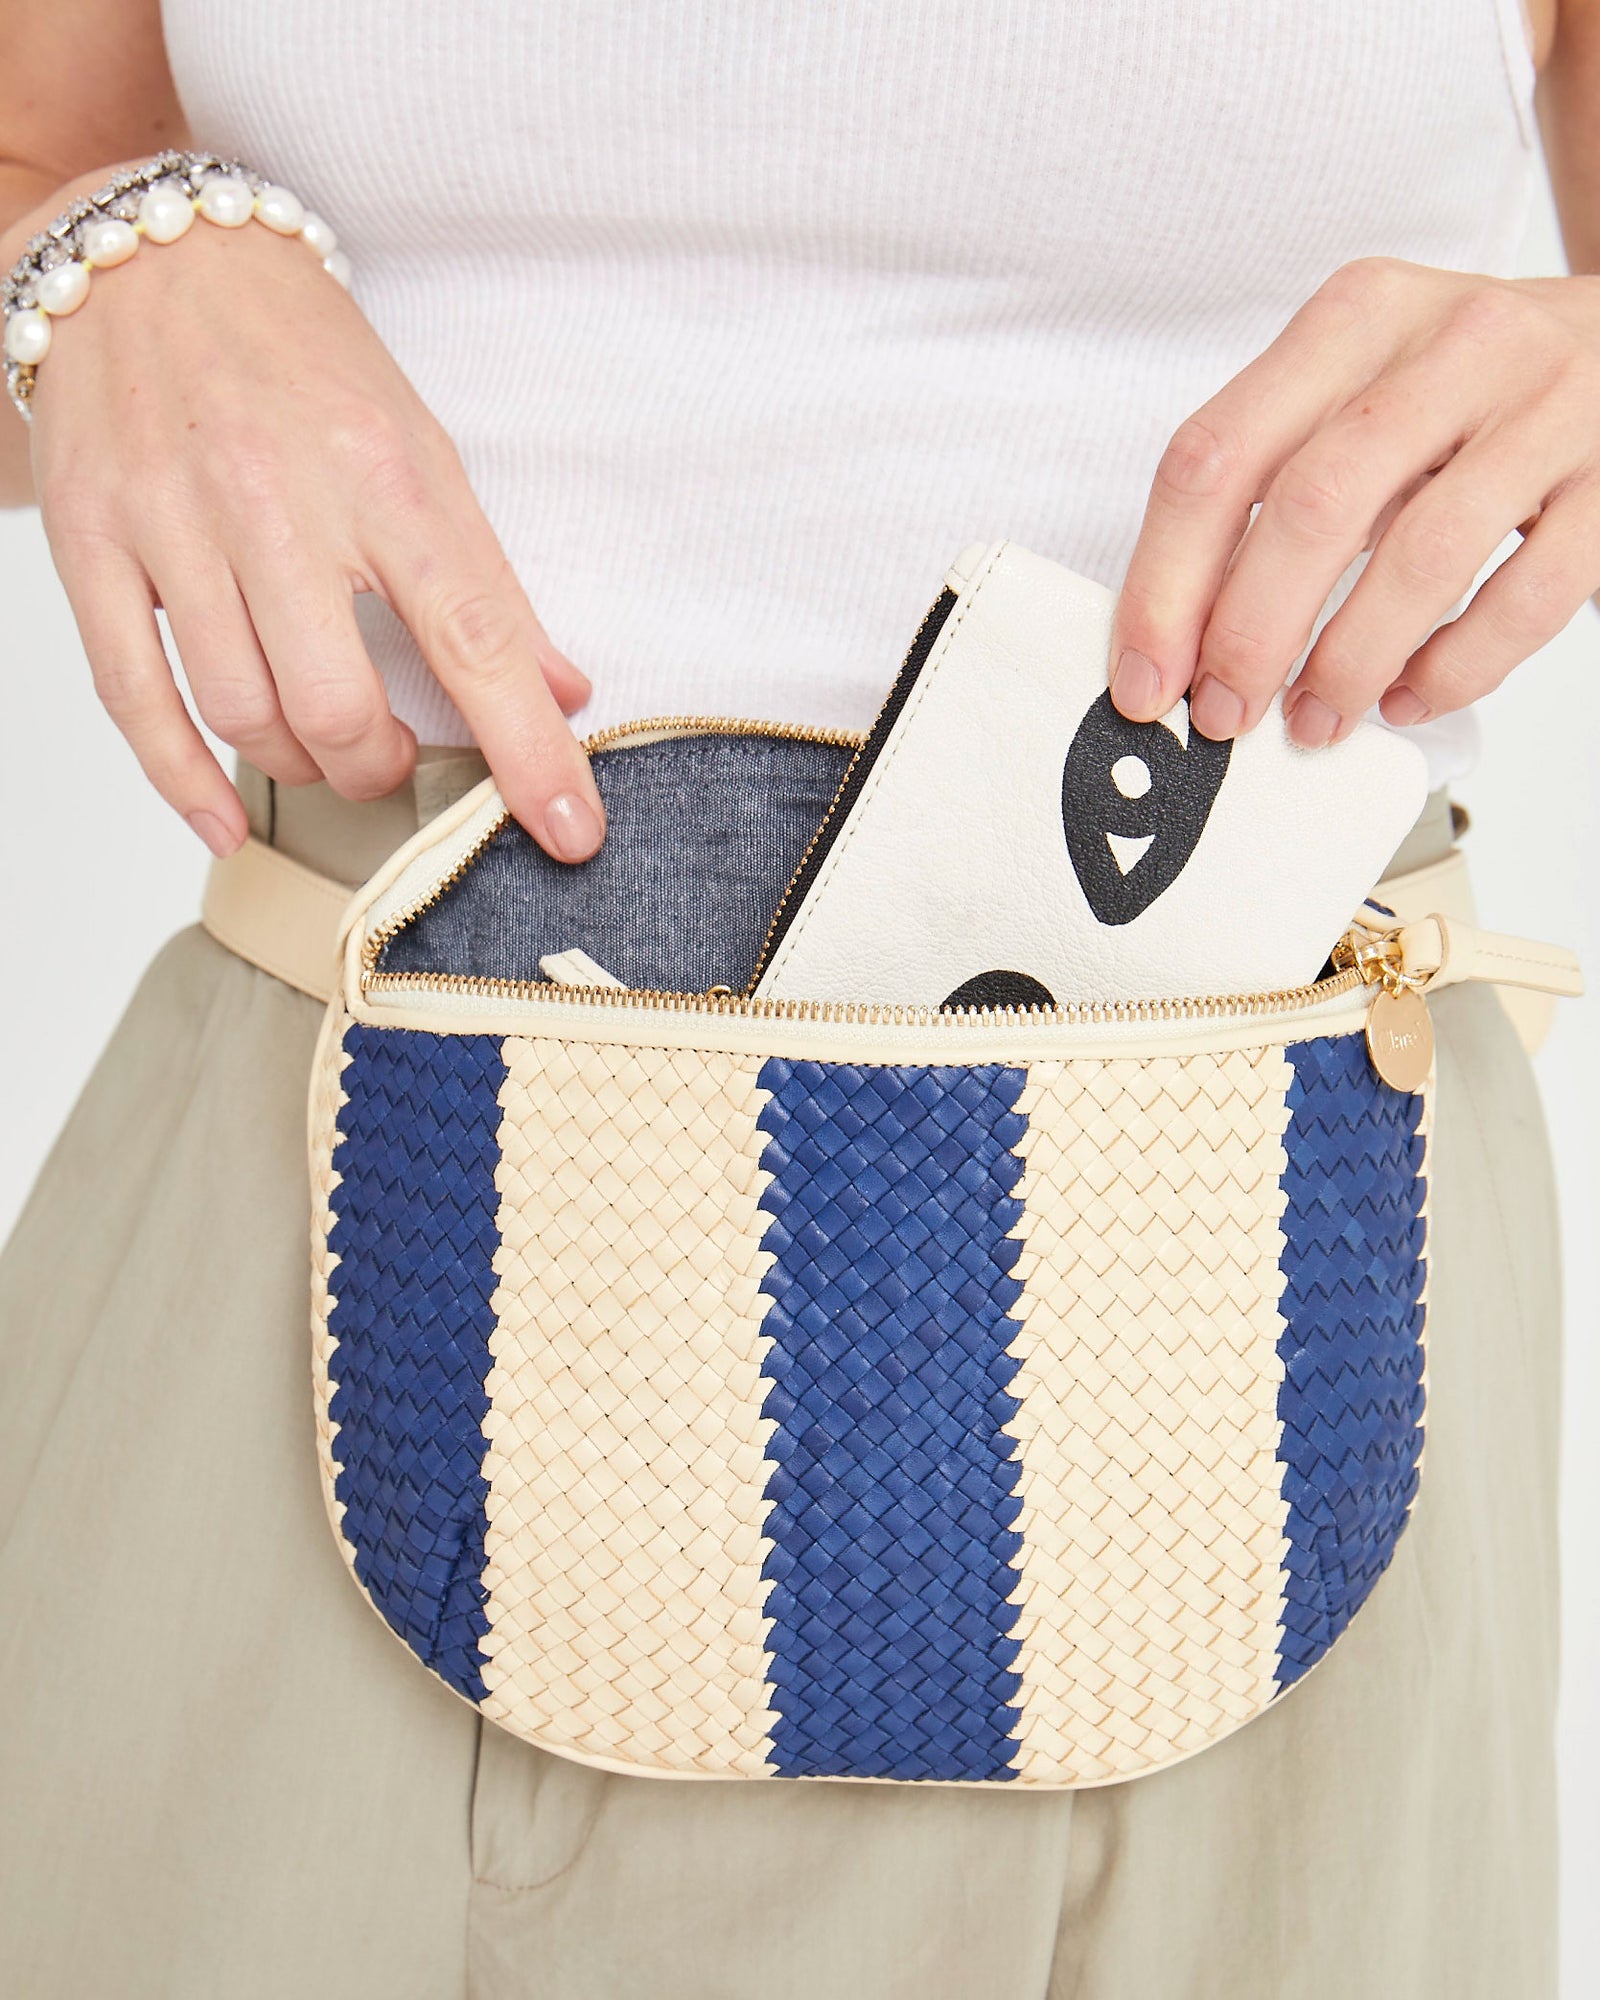 Clare V.  Fanny Pack, Rustic Two-Tone Blood Orange and Navy – LAPIS